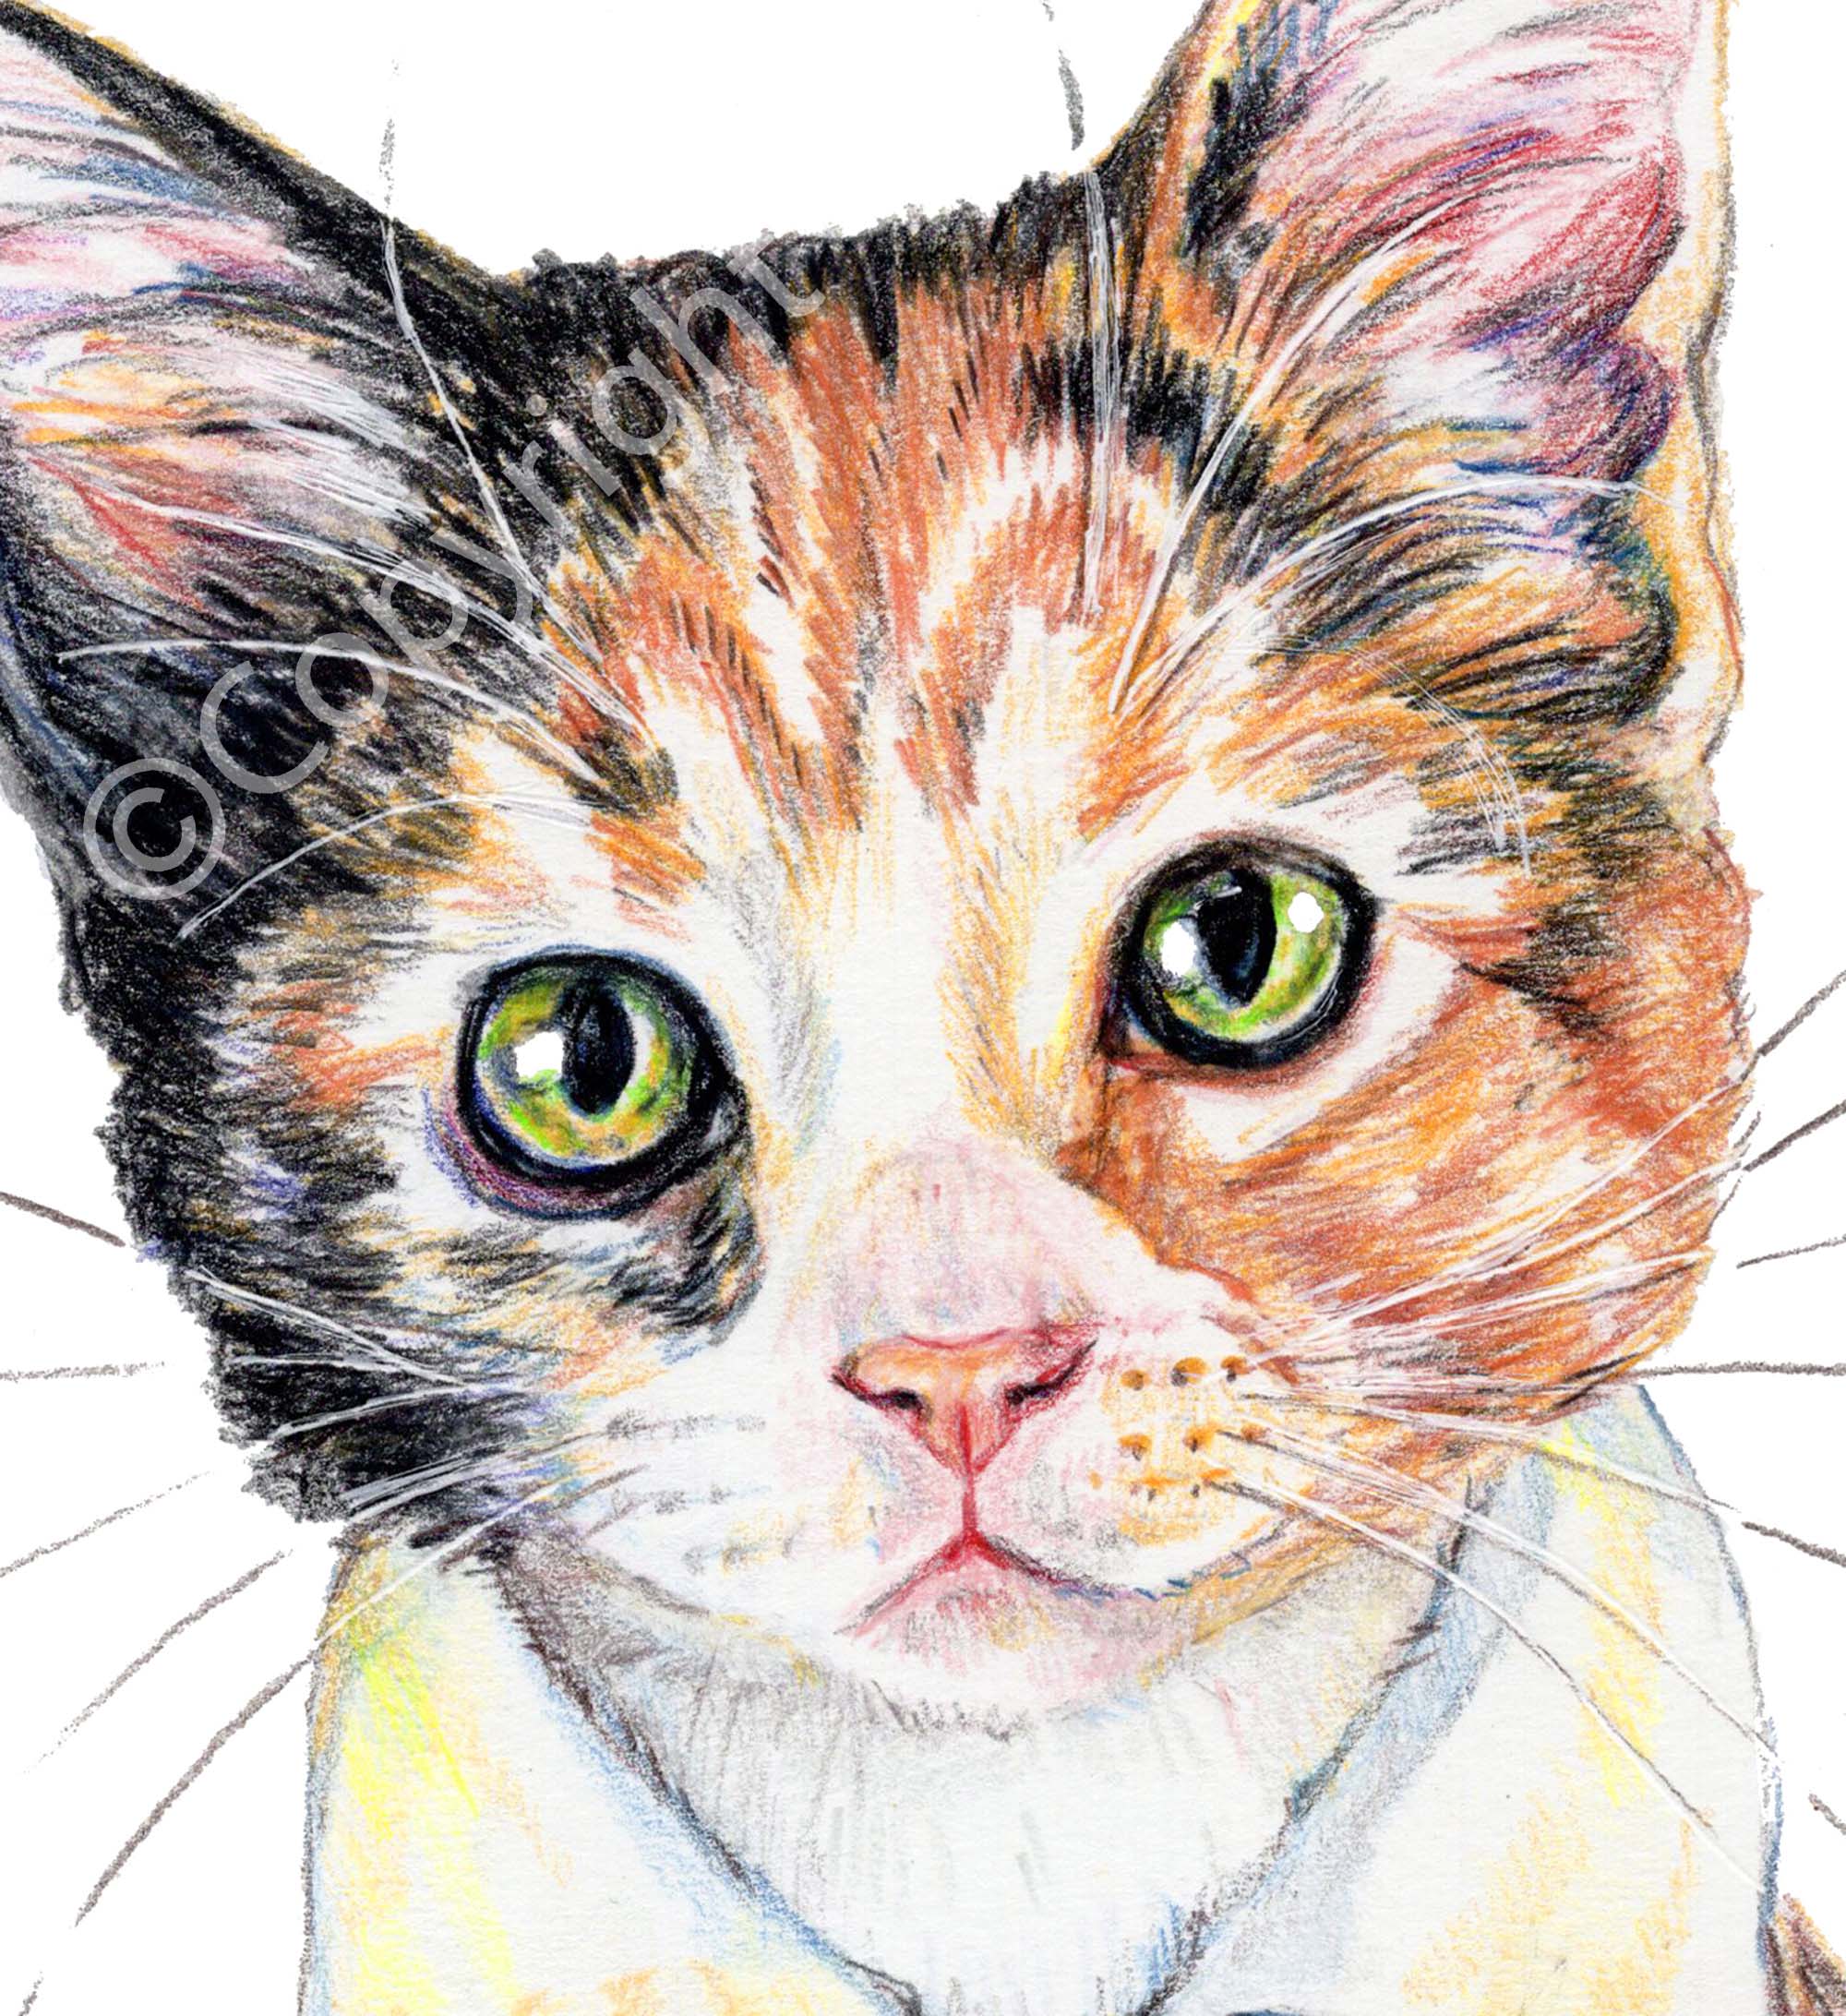 Realistic Cat In Profile Sketch Vector Graphic Colour Illustration On White  Background Stock Illustration - Download Image Now - iStock